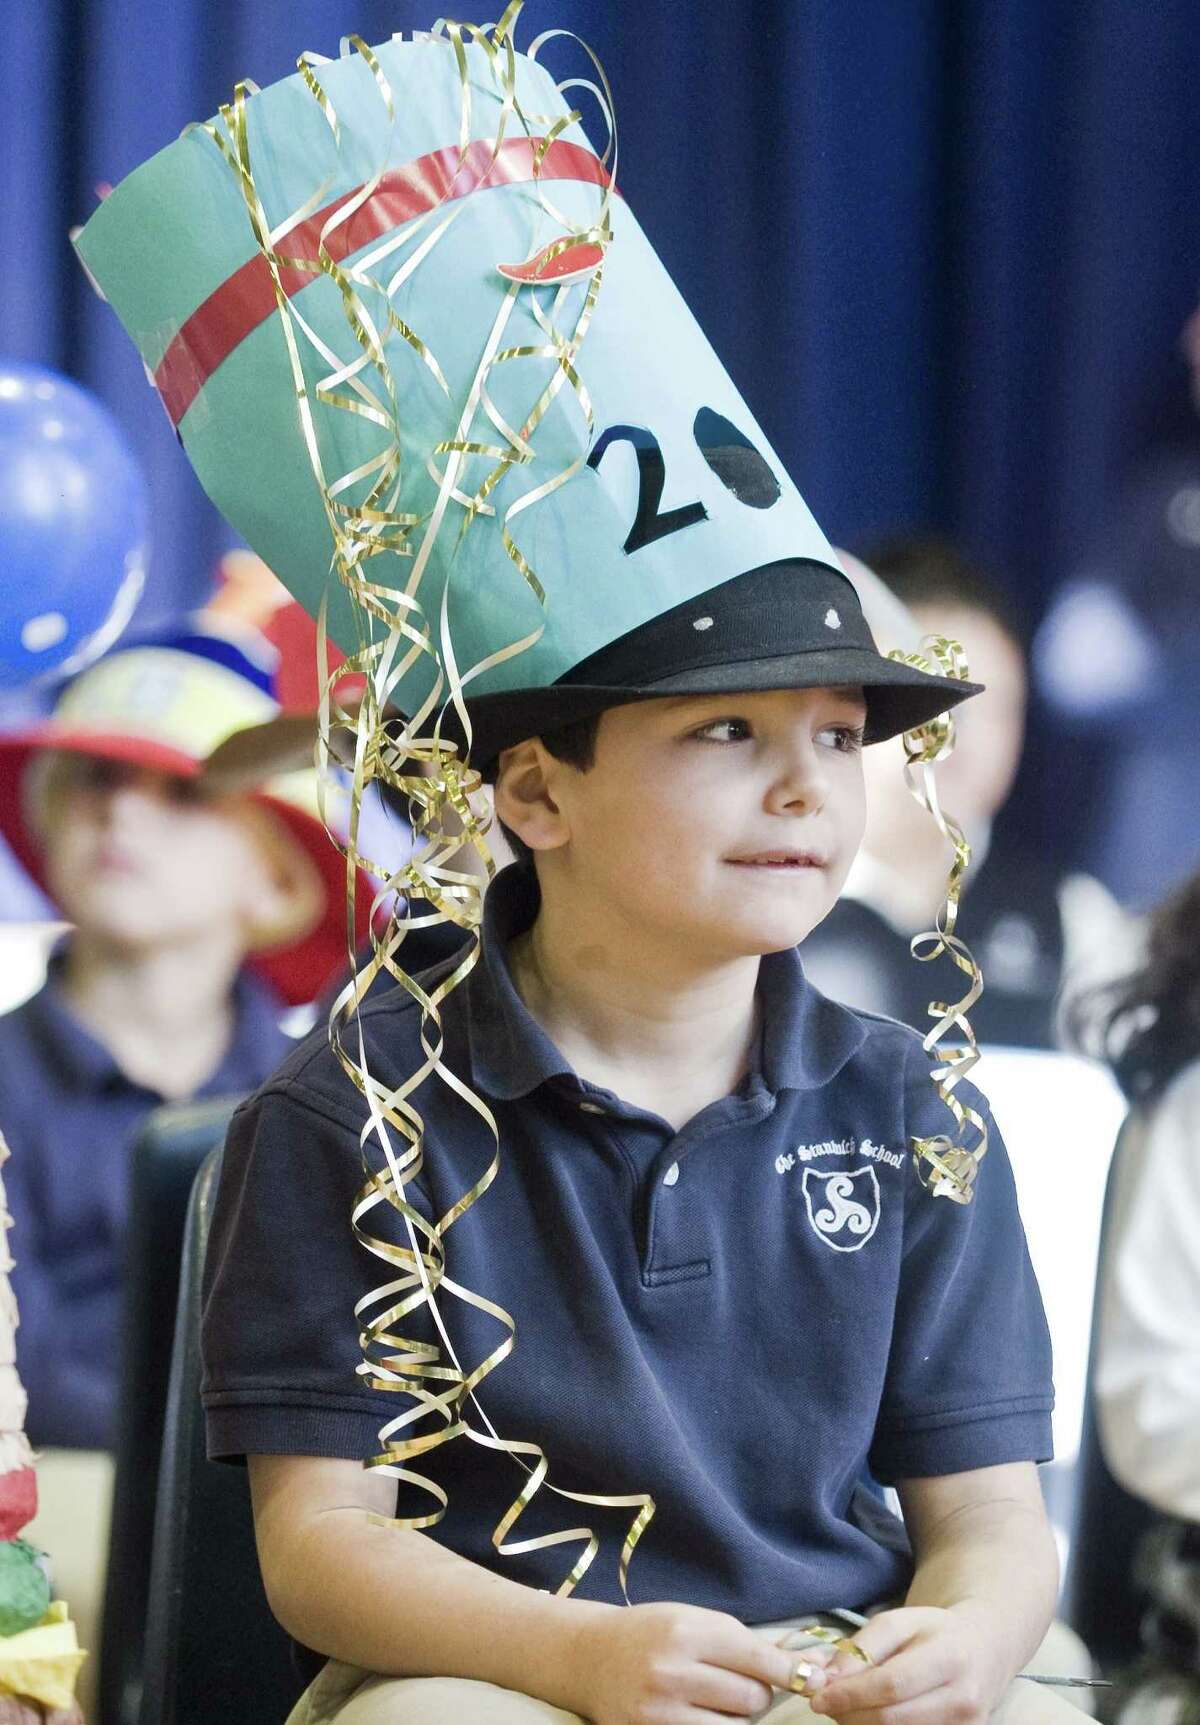 First-grader Ryan Robertson listens to the assembly speakers at the Stanwich School in Greenwich, celebrating its 20th birthday, or Charter Day, the anniversary of the school receiving its charter from the state of Connecticut. Friday, Jan. 26, 2018